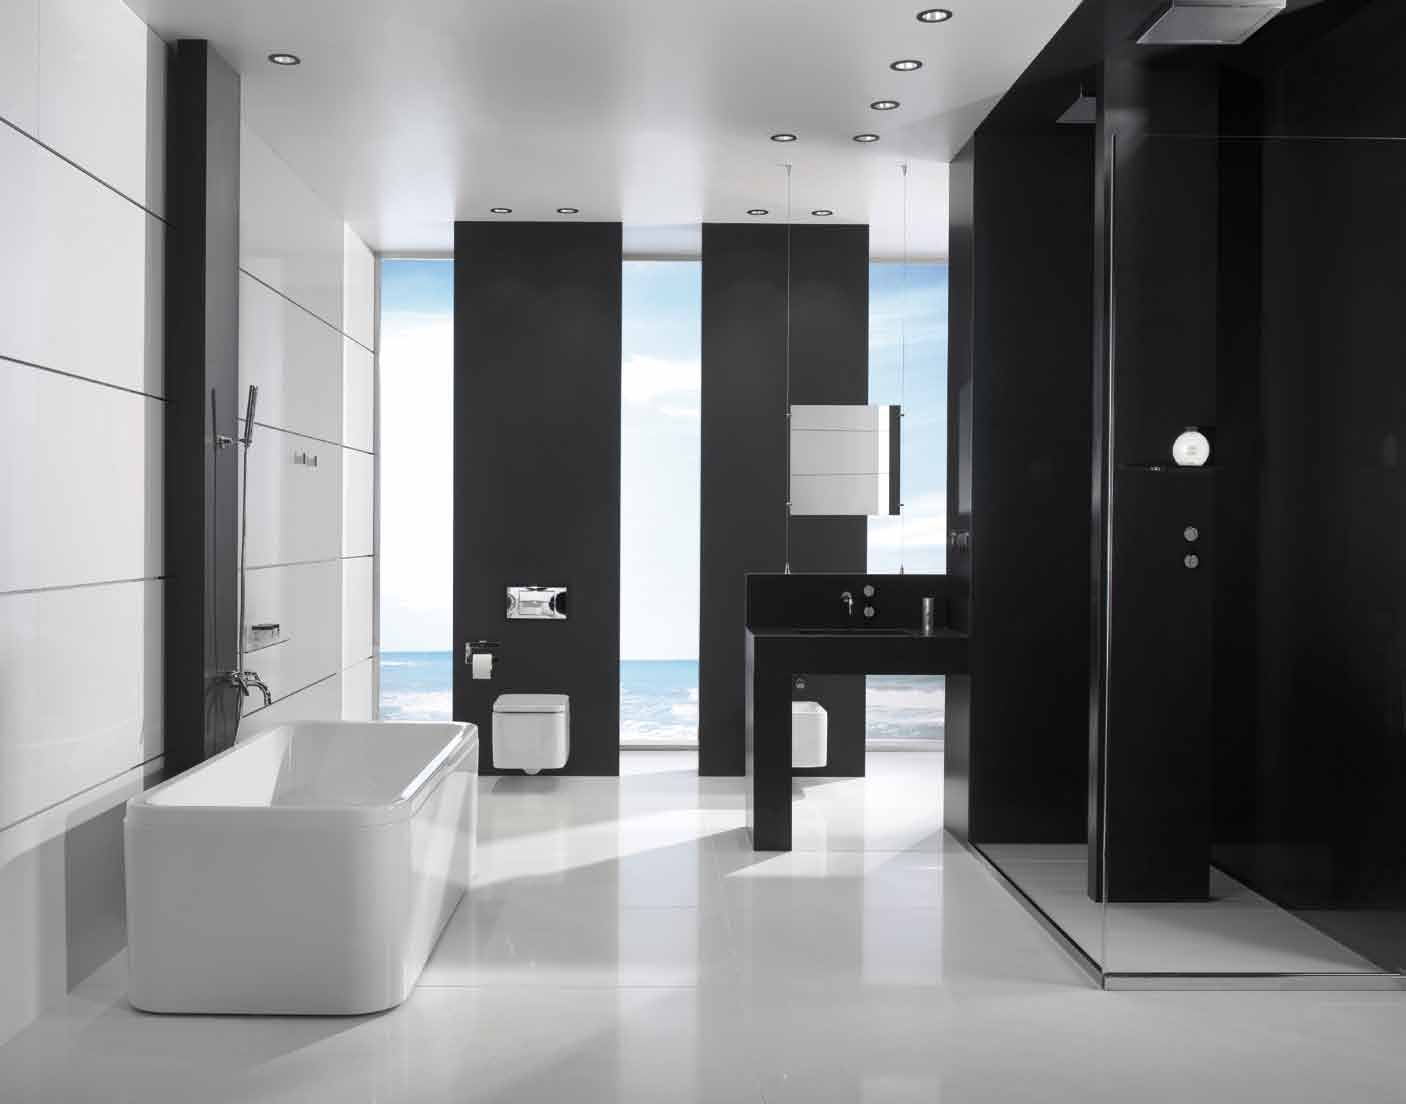 REINVENT YOUR SPACE large formats Silestone can create an entire bathroom in a single material, giving the room more integration and continuity of its